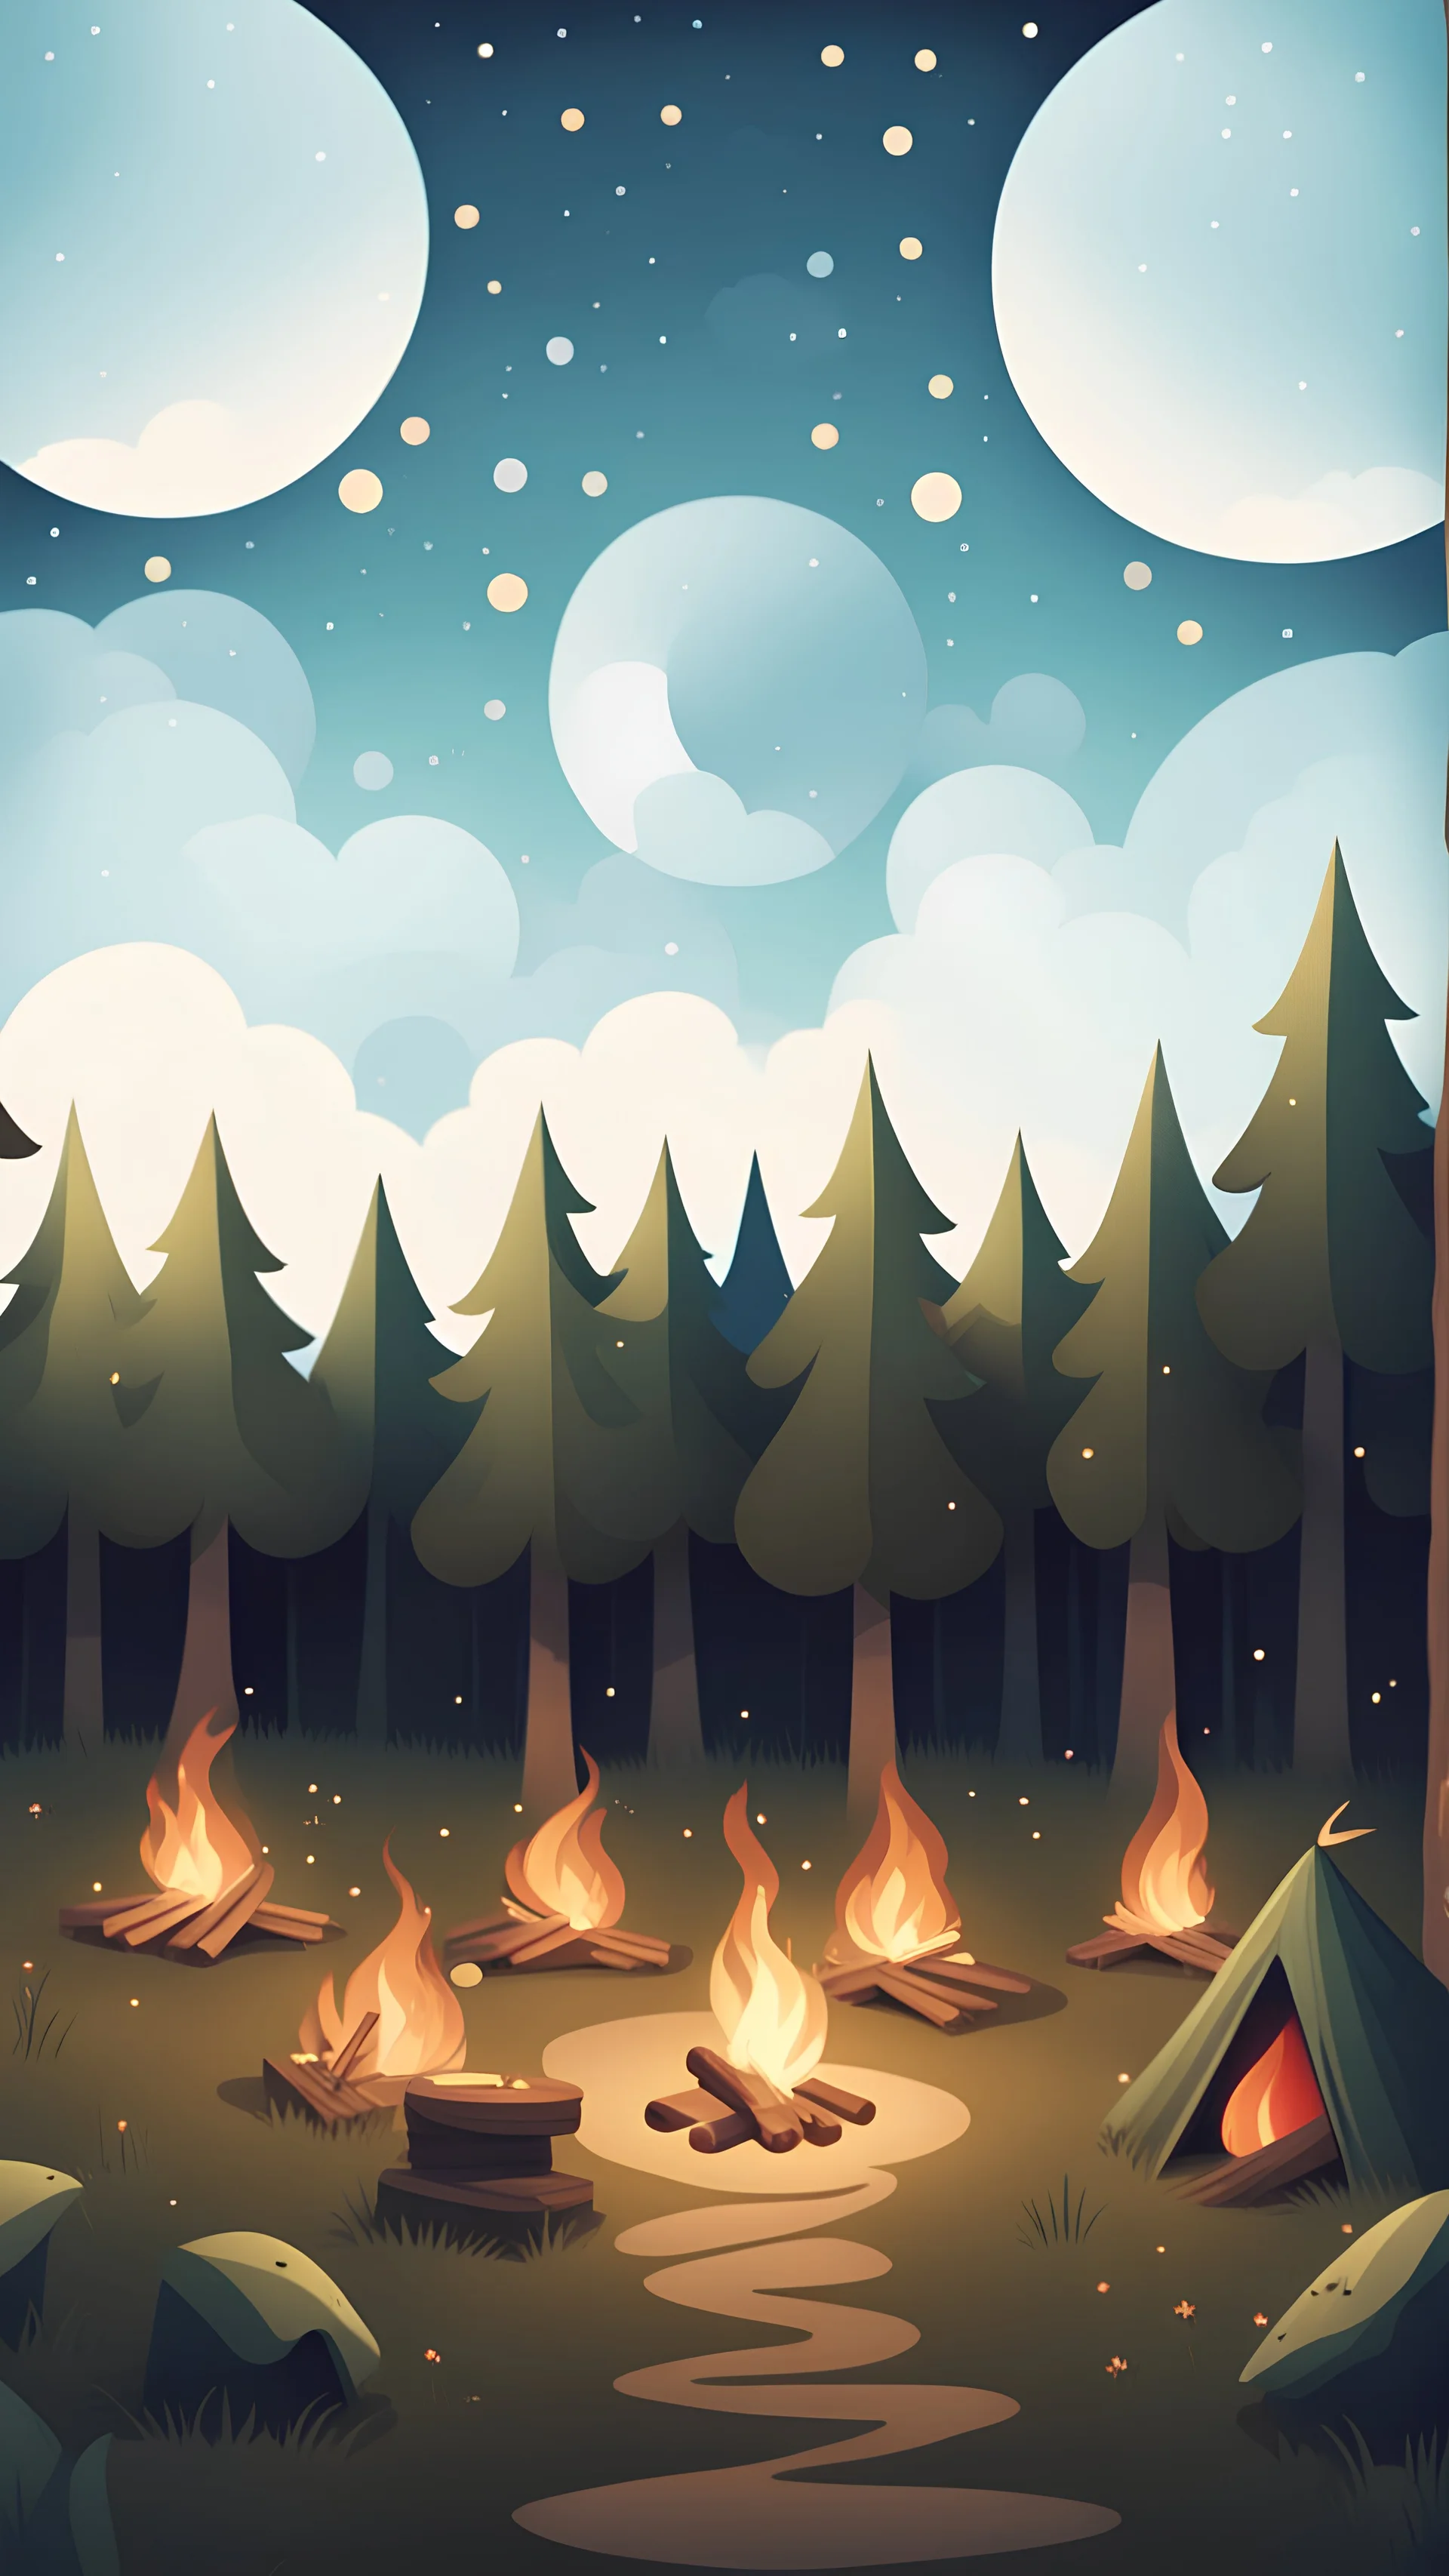 a path into magic forest in the evening, campfire in the middle, happy people celebrating, vintage style